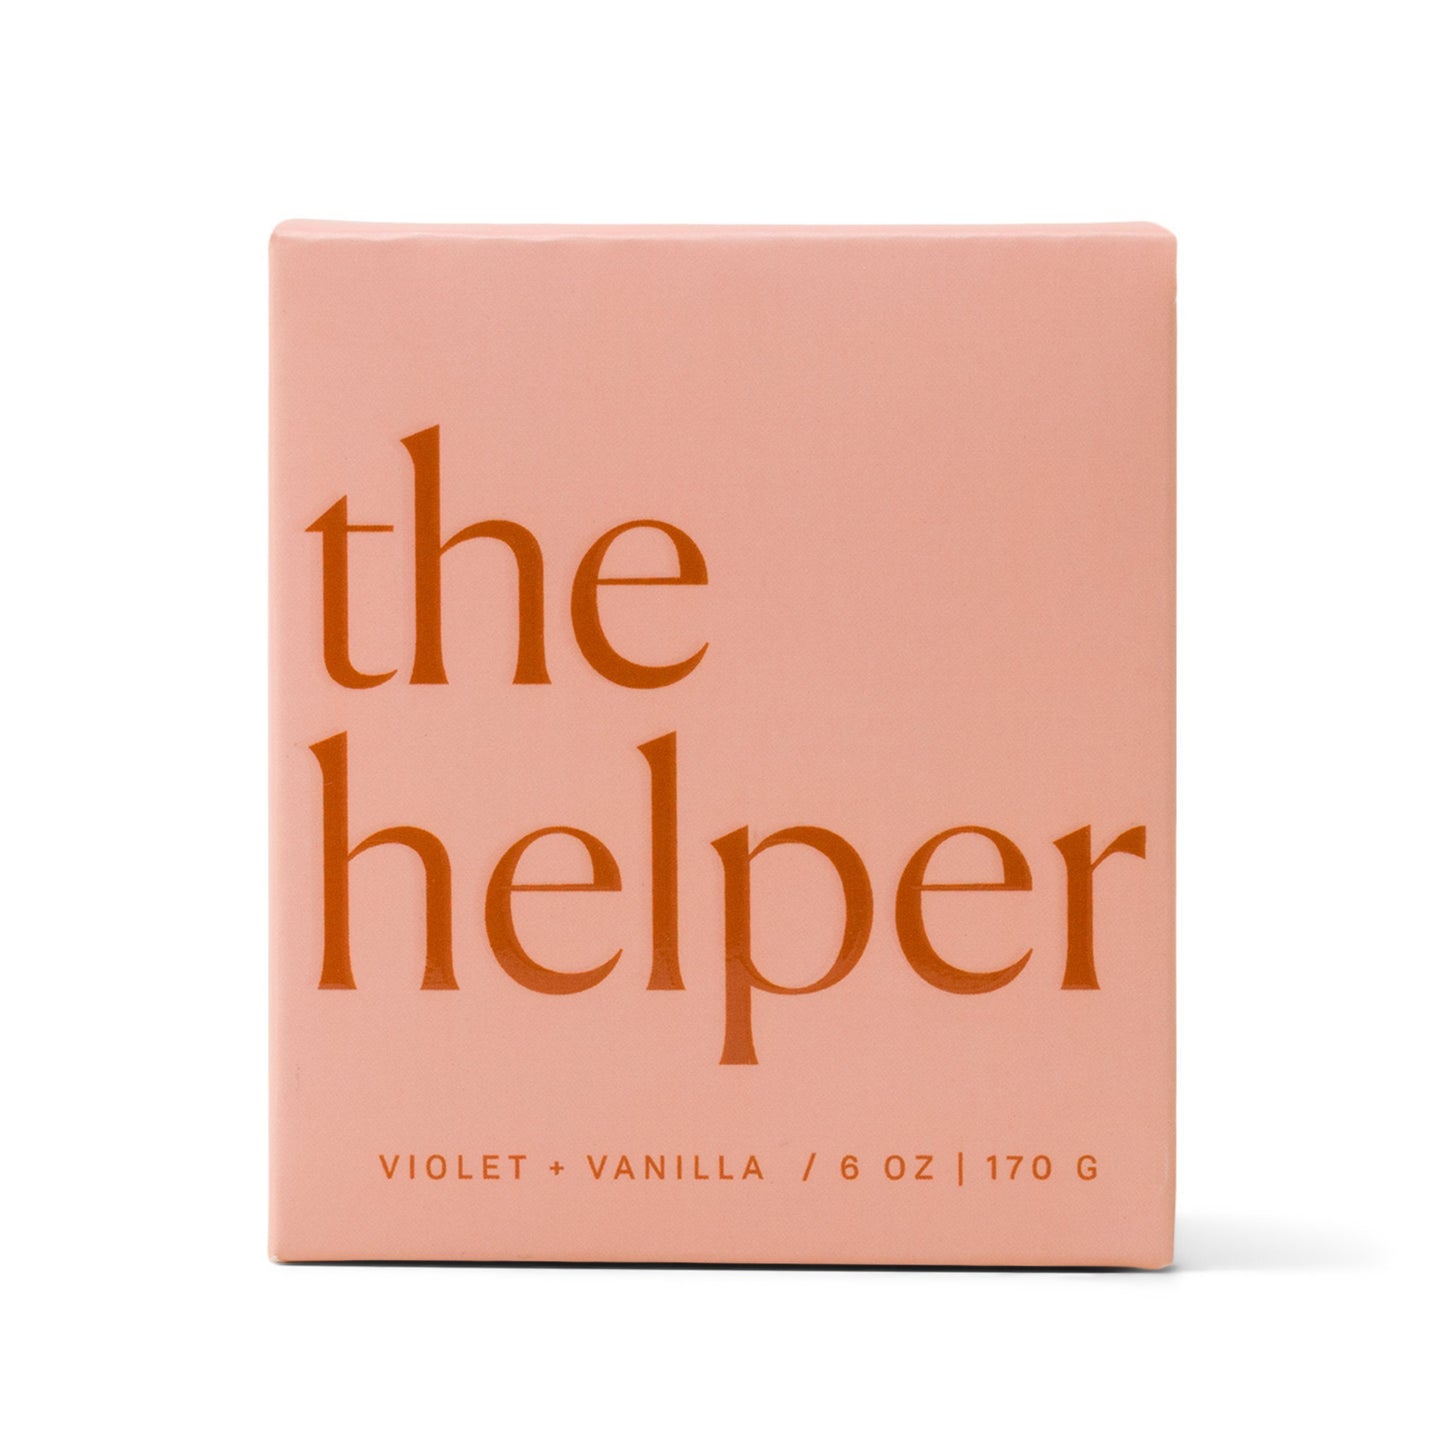 Pink box with "the helper" printed on the front; Also has the number 2 printed on the side